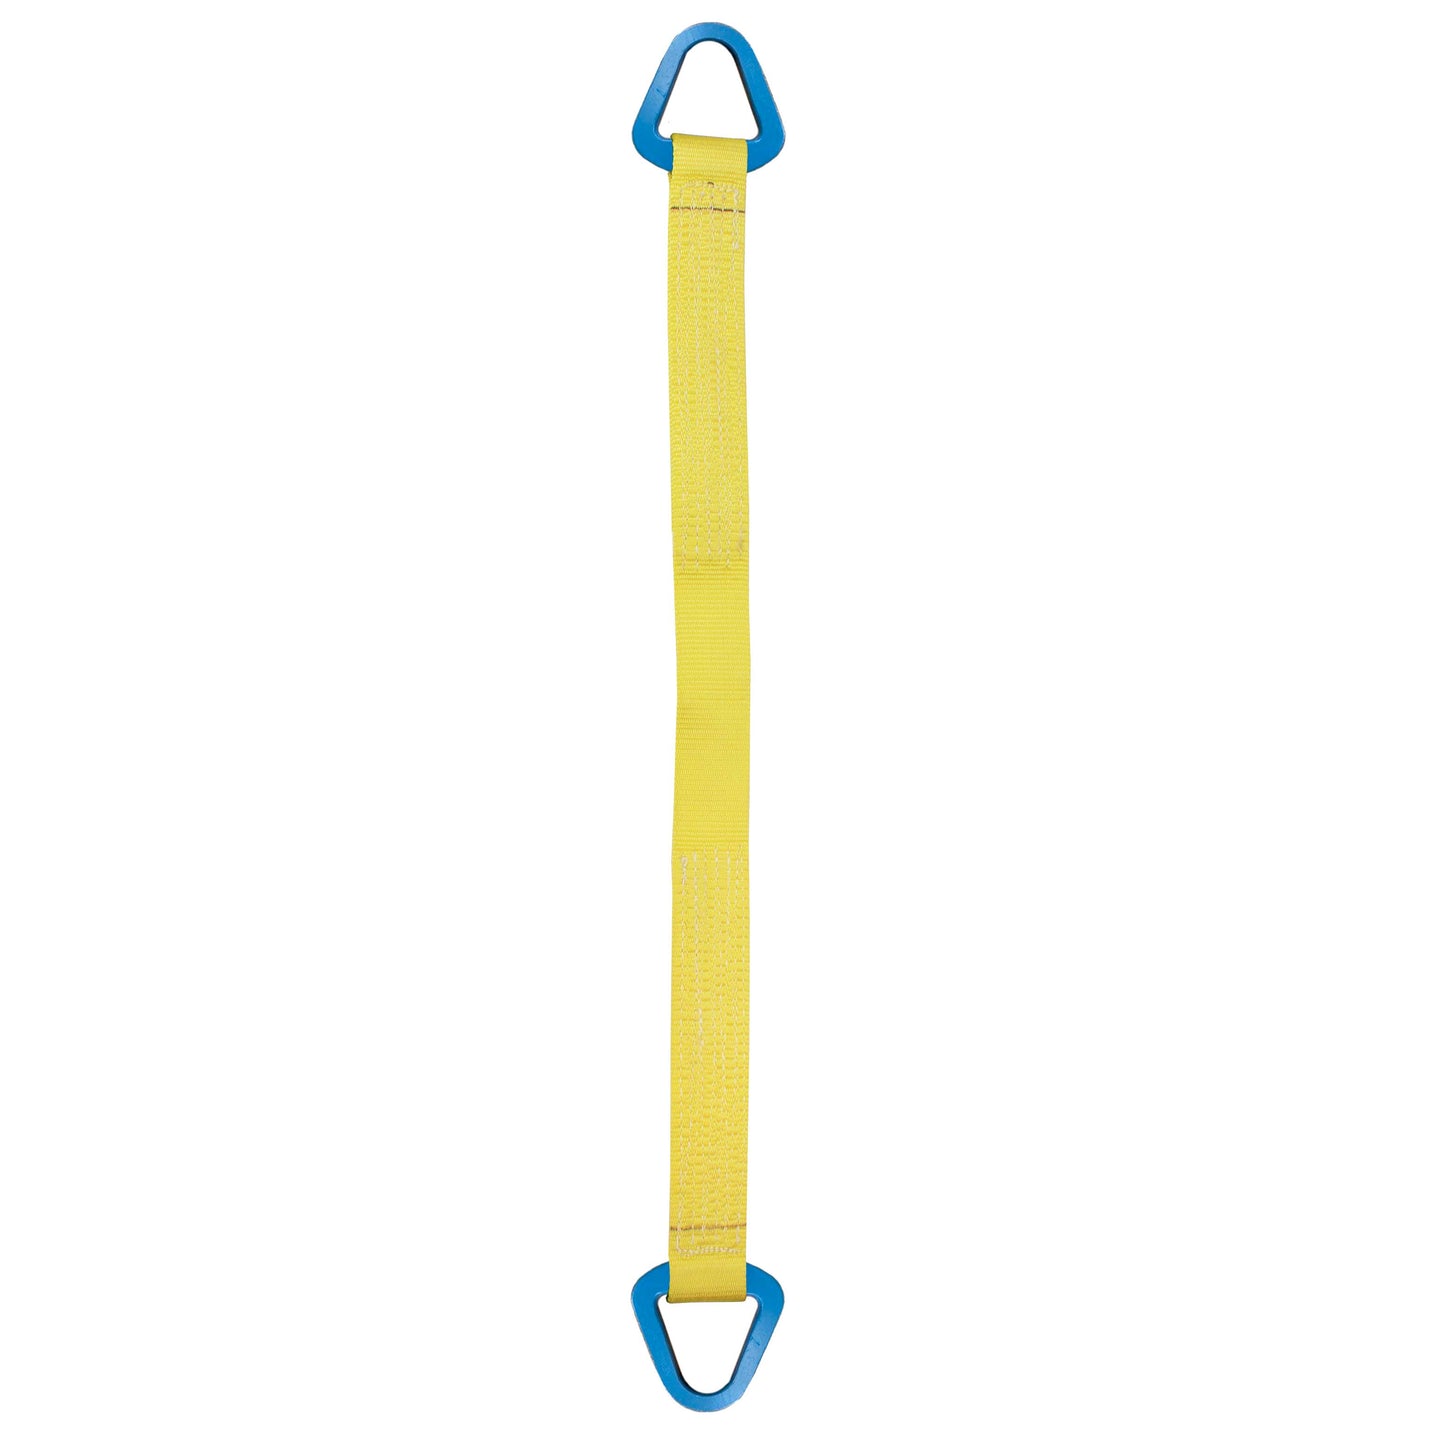 Nylon Lifting Sling Triangle 12 inch x 3 foot 2ply image 1 of 2